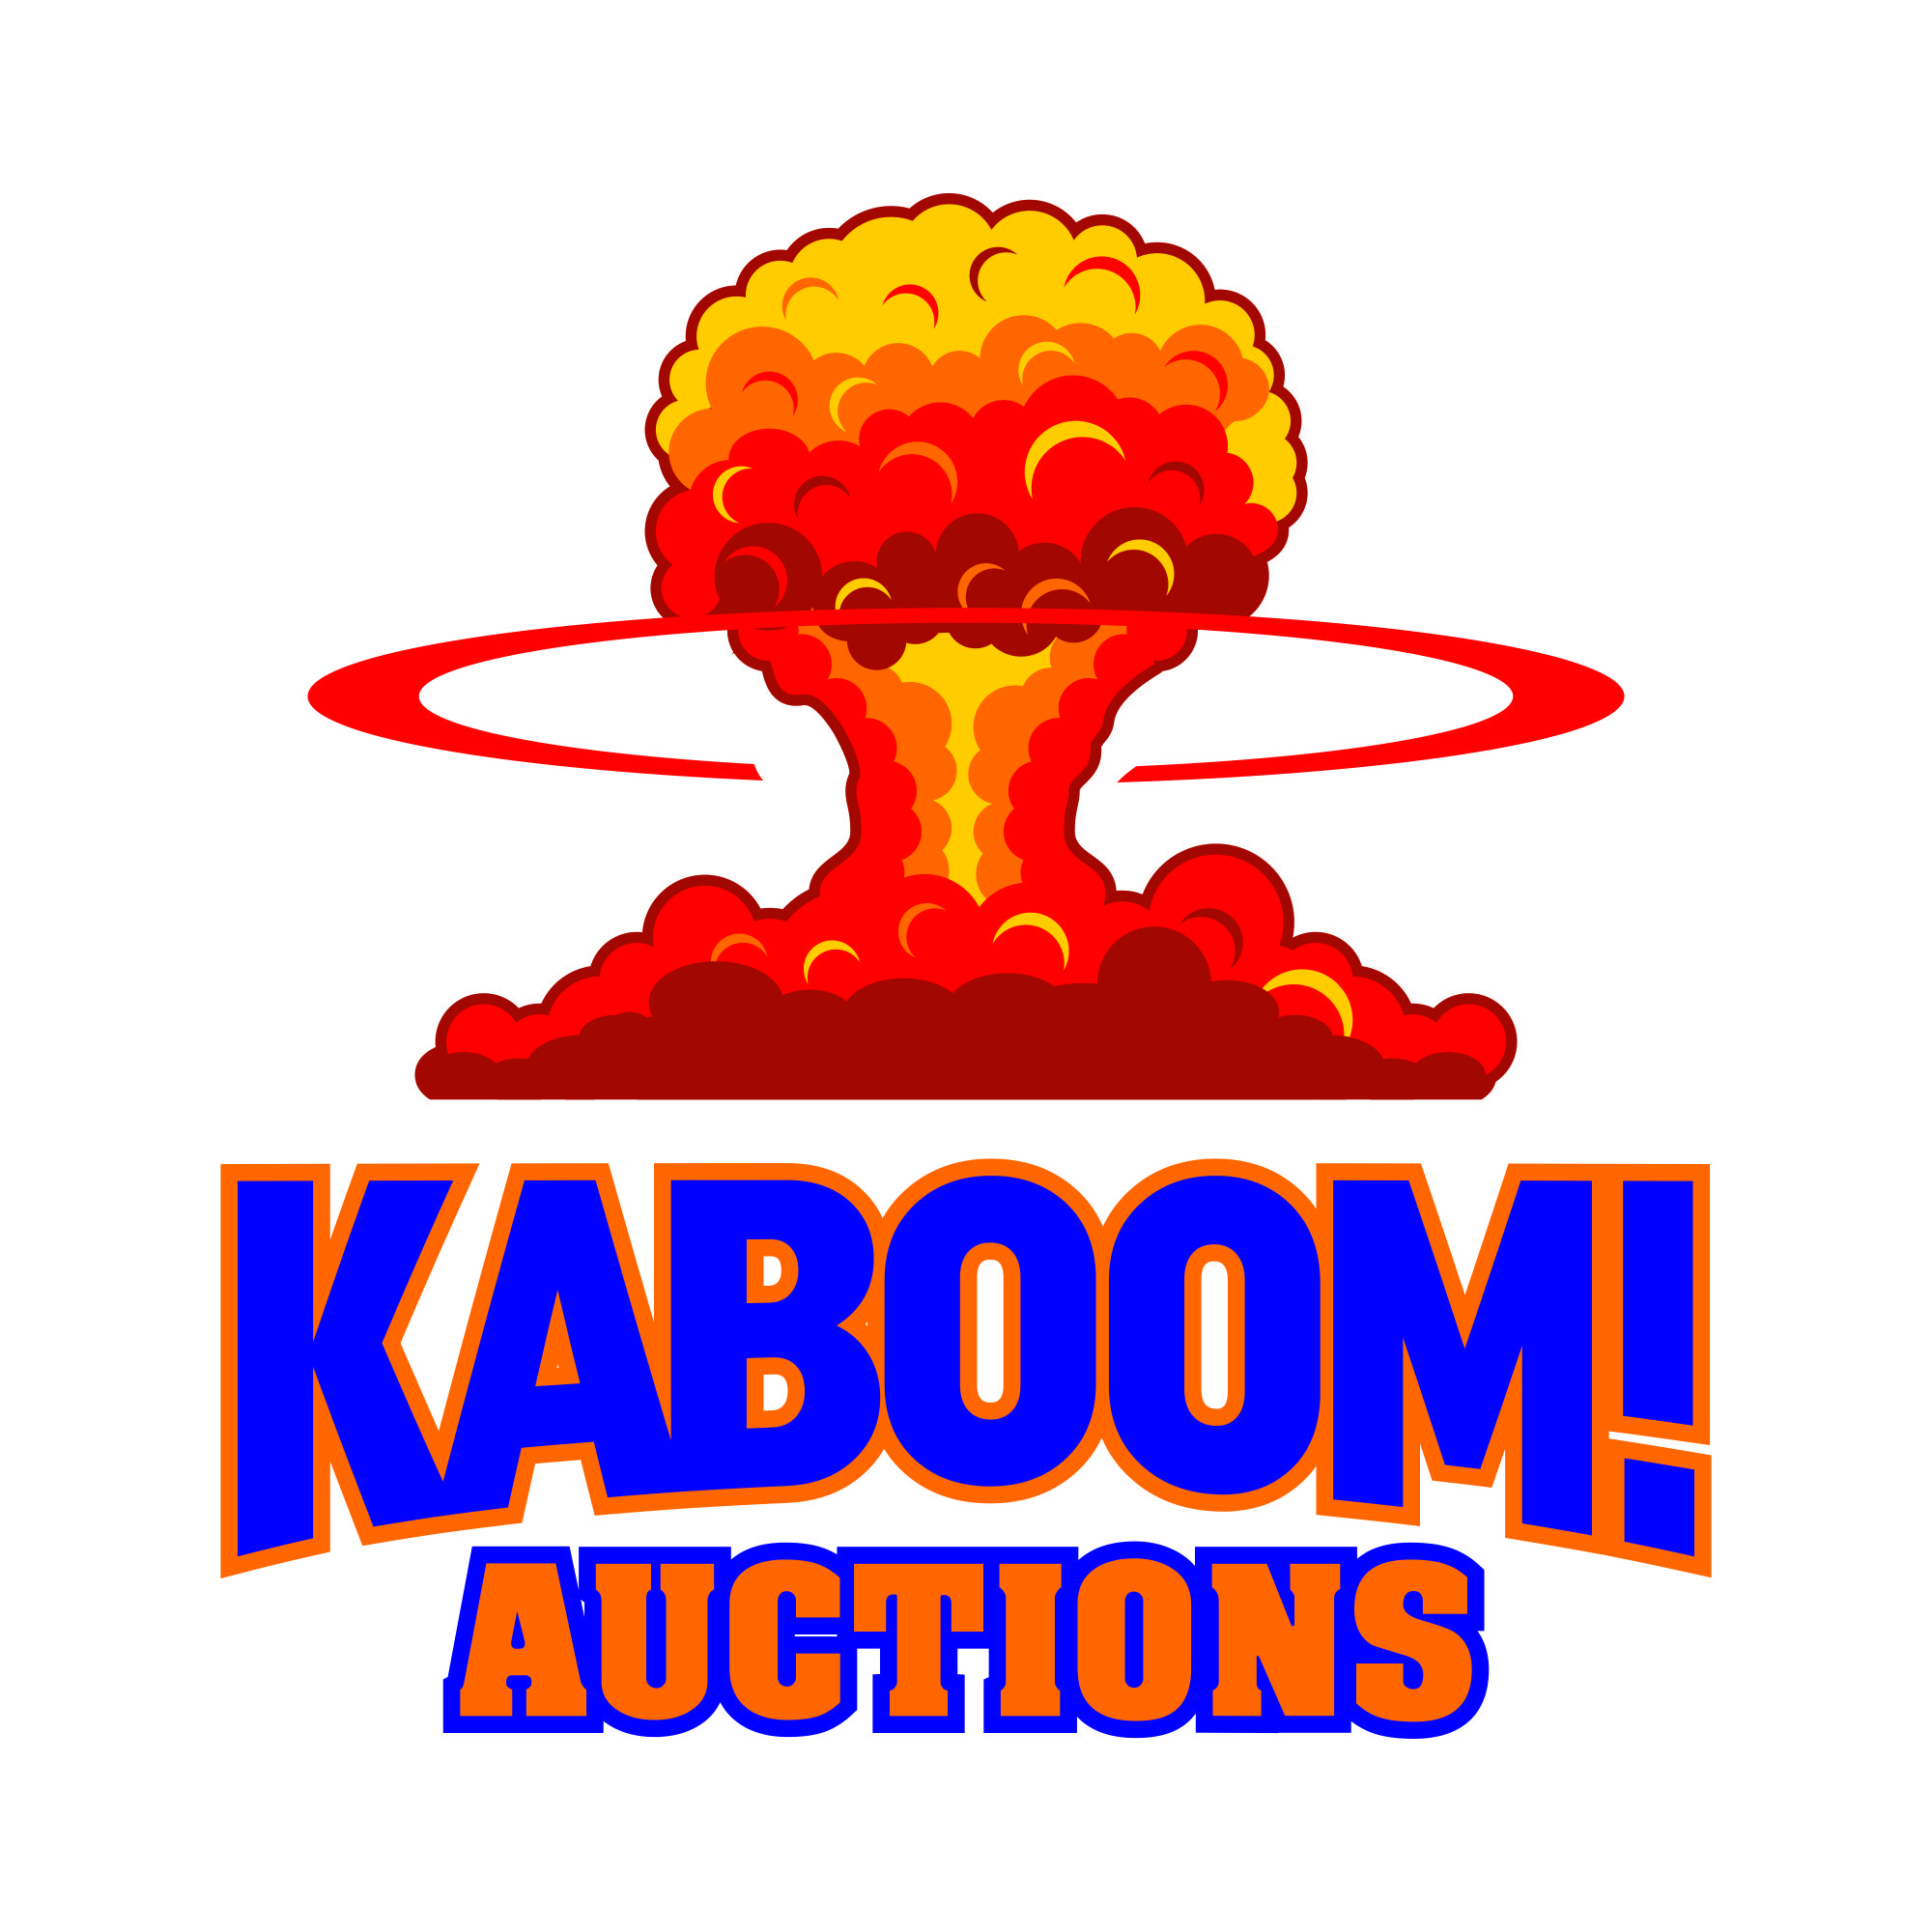 Kaboom Auctions